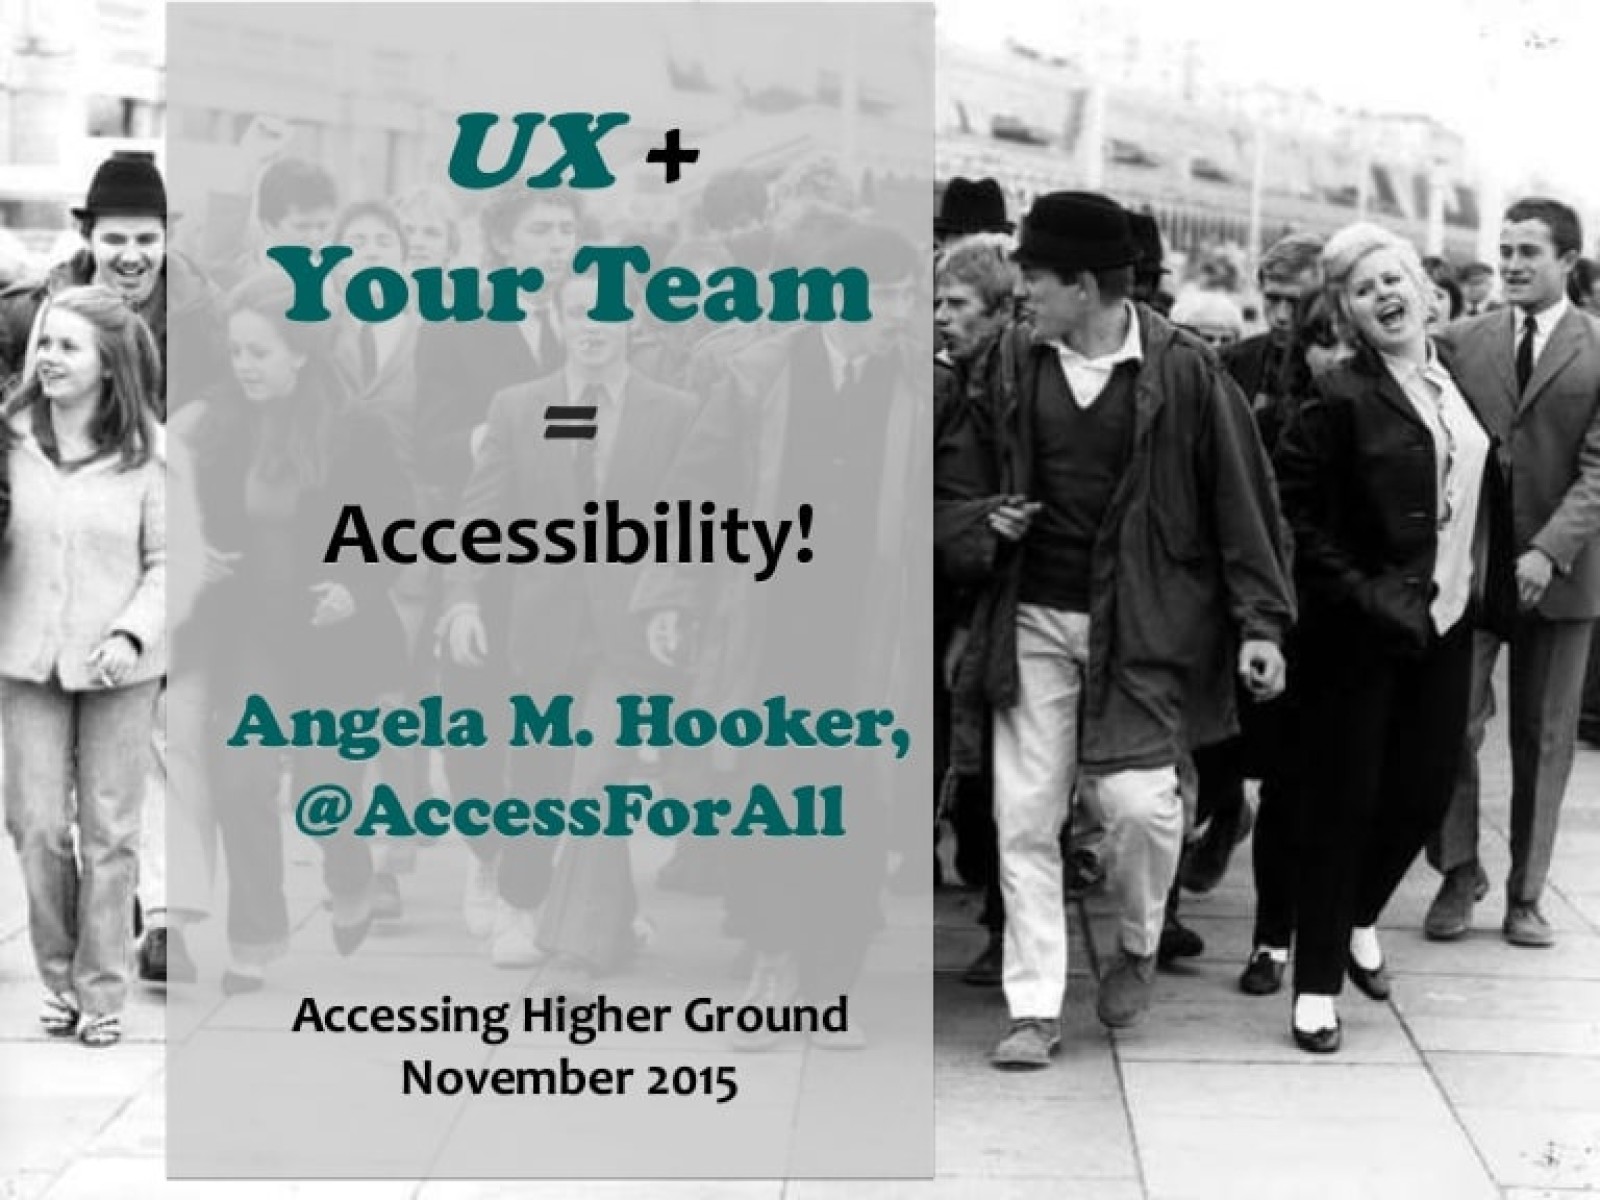 UX + Your Team = Accessibility